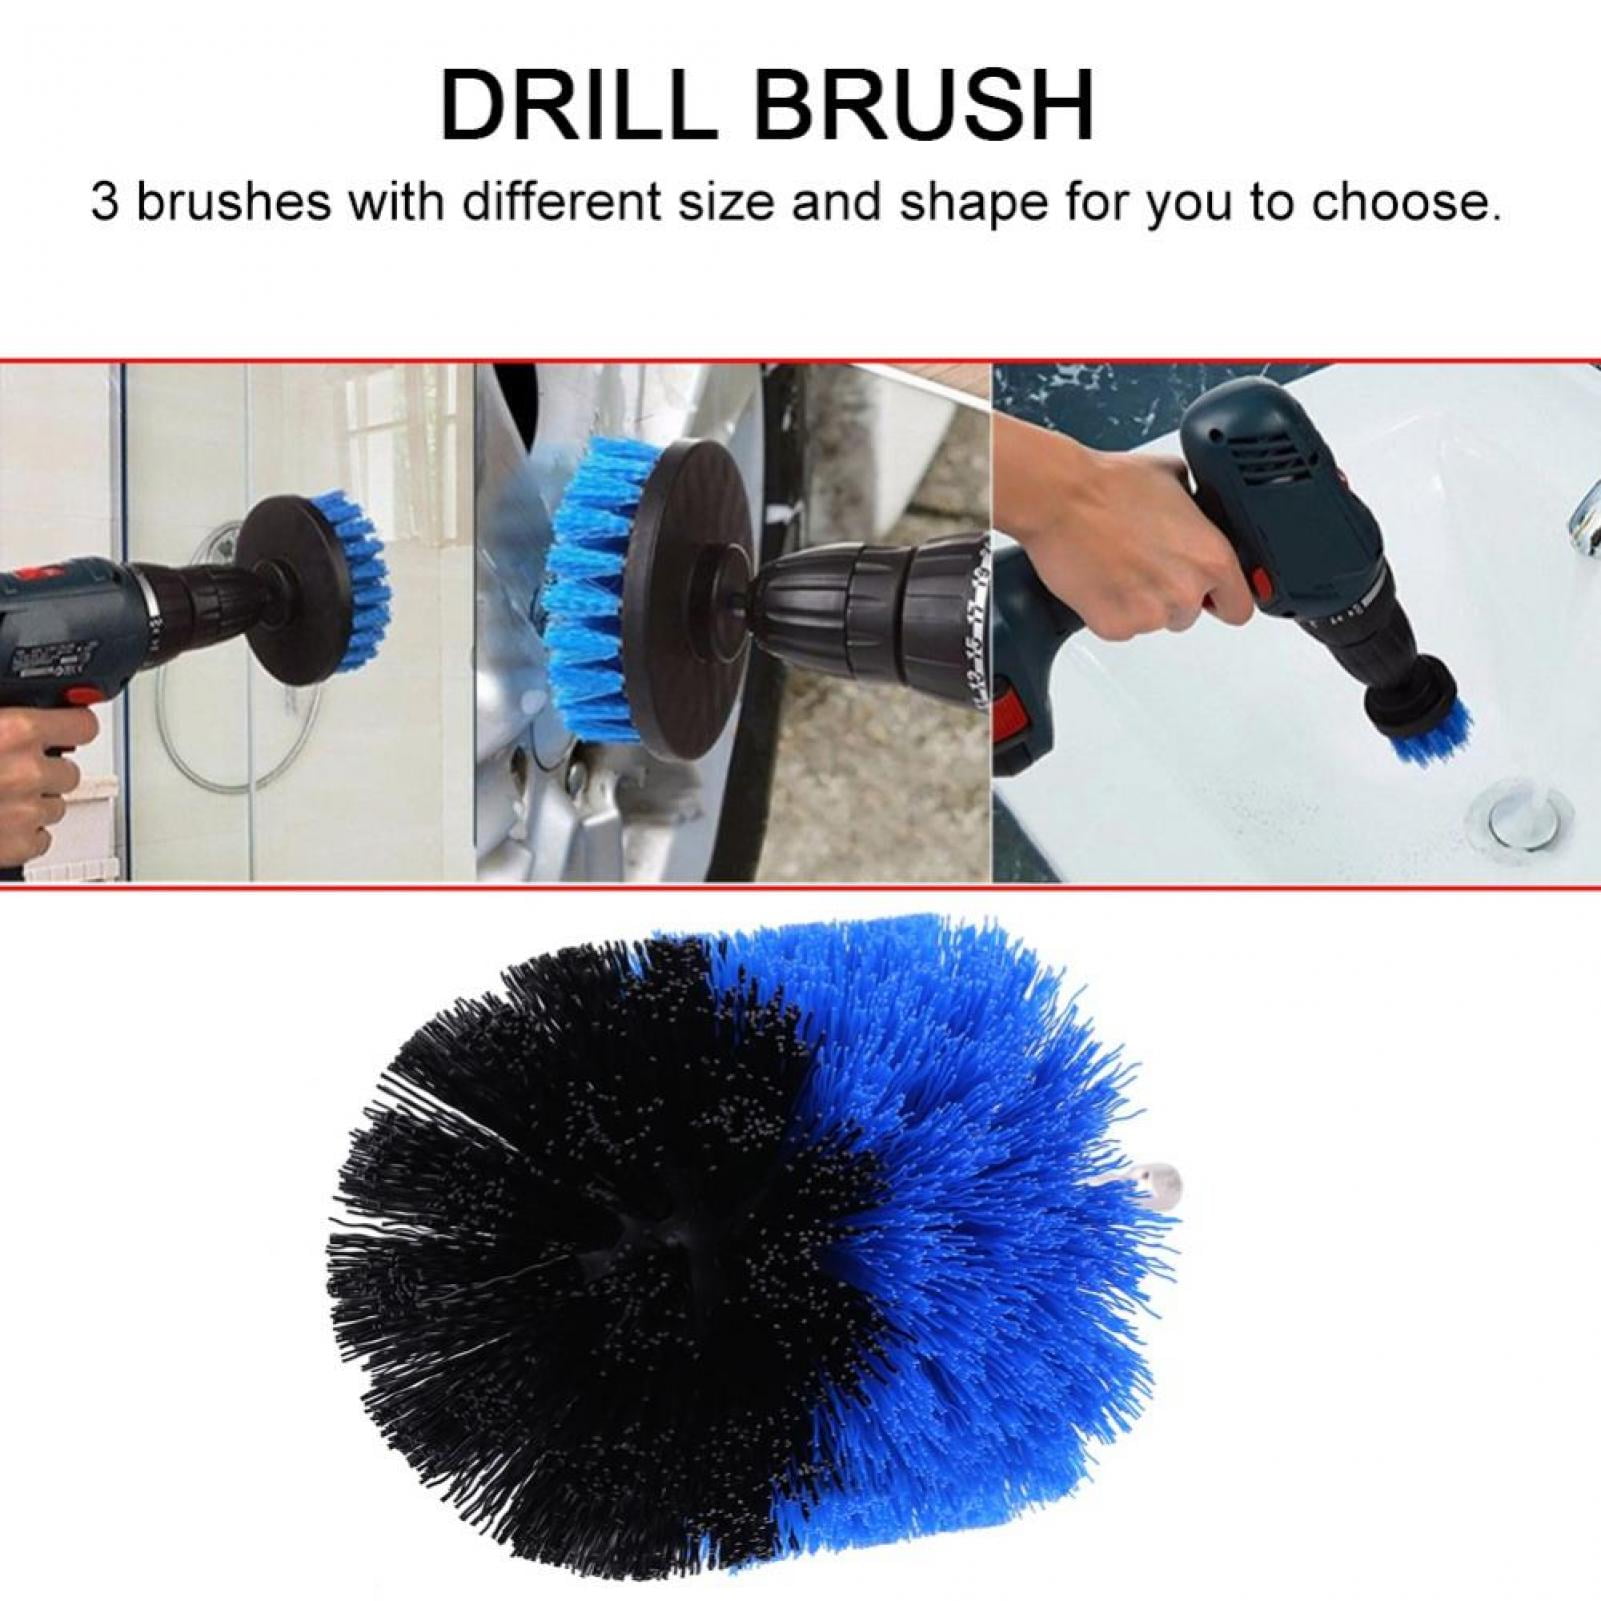 Drillbrush Grout Cleaner, Carpet Cleaner, Shower Cleaner, Bidet & Toilet  Brush, Tub & Floor Scrubber, Y-S-4M-5X-QC-DB at Tractor Supply Co.